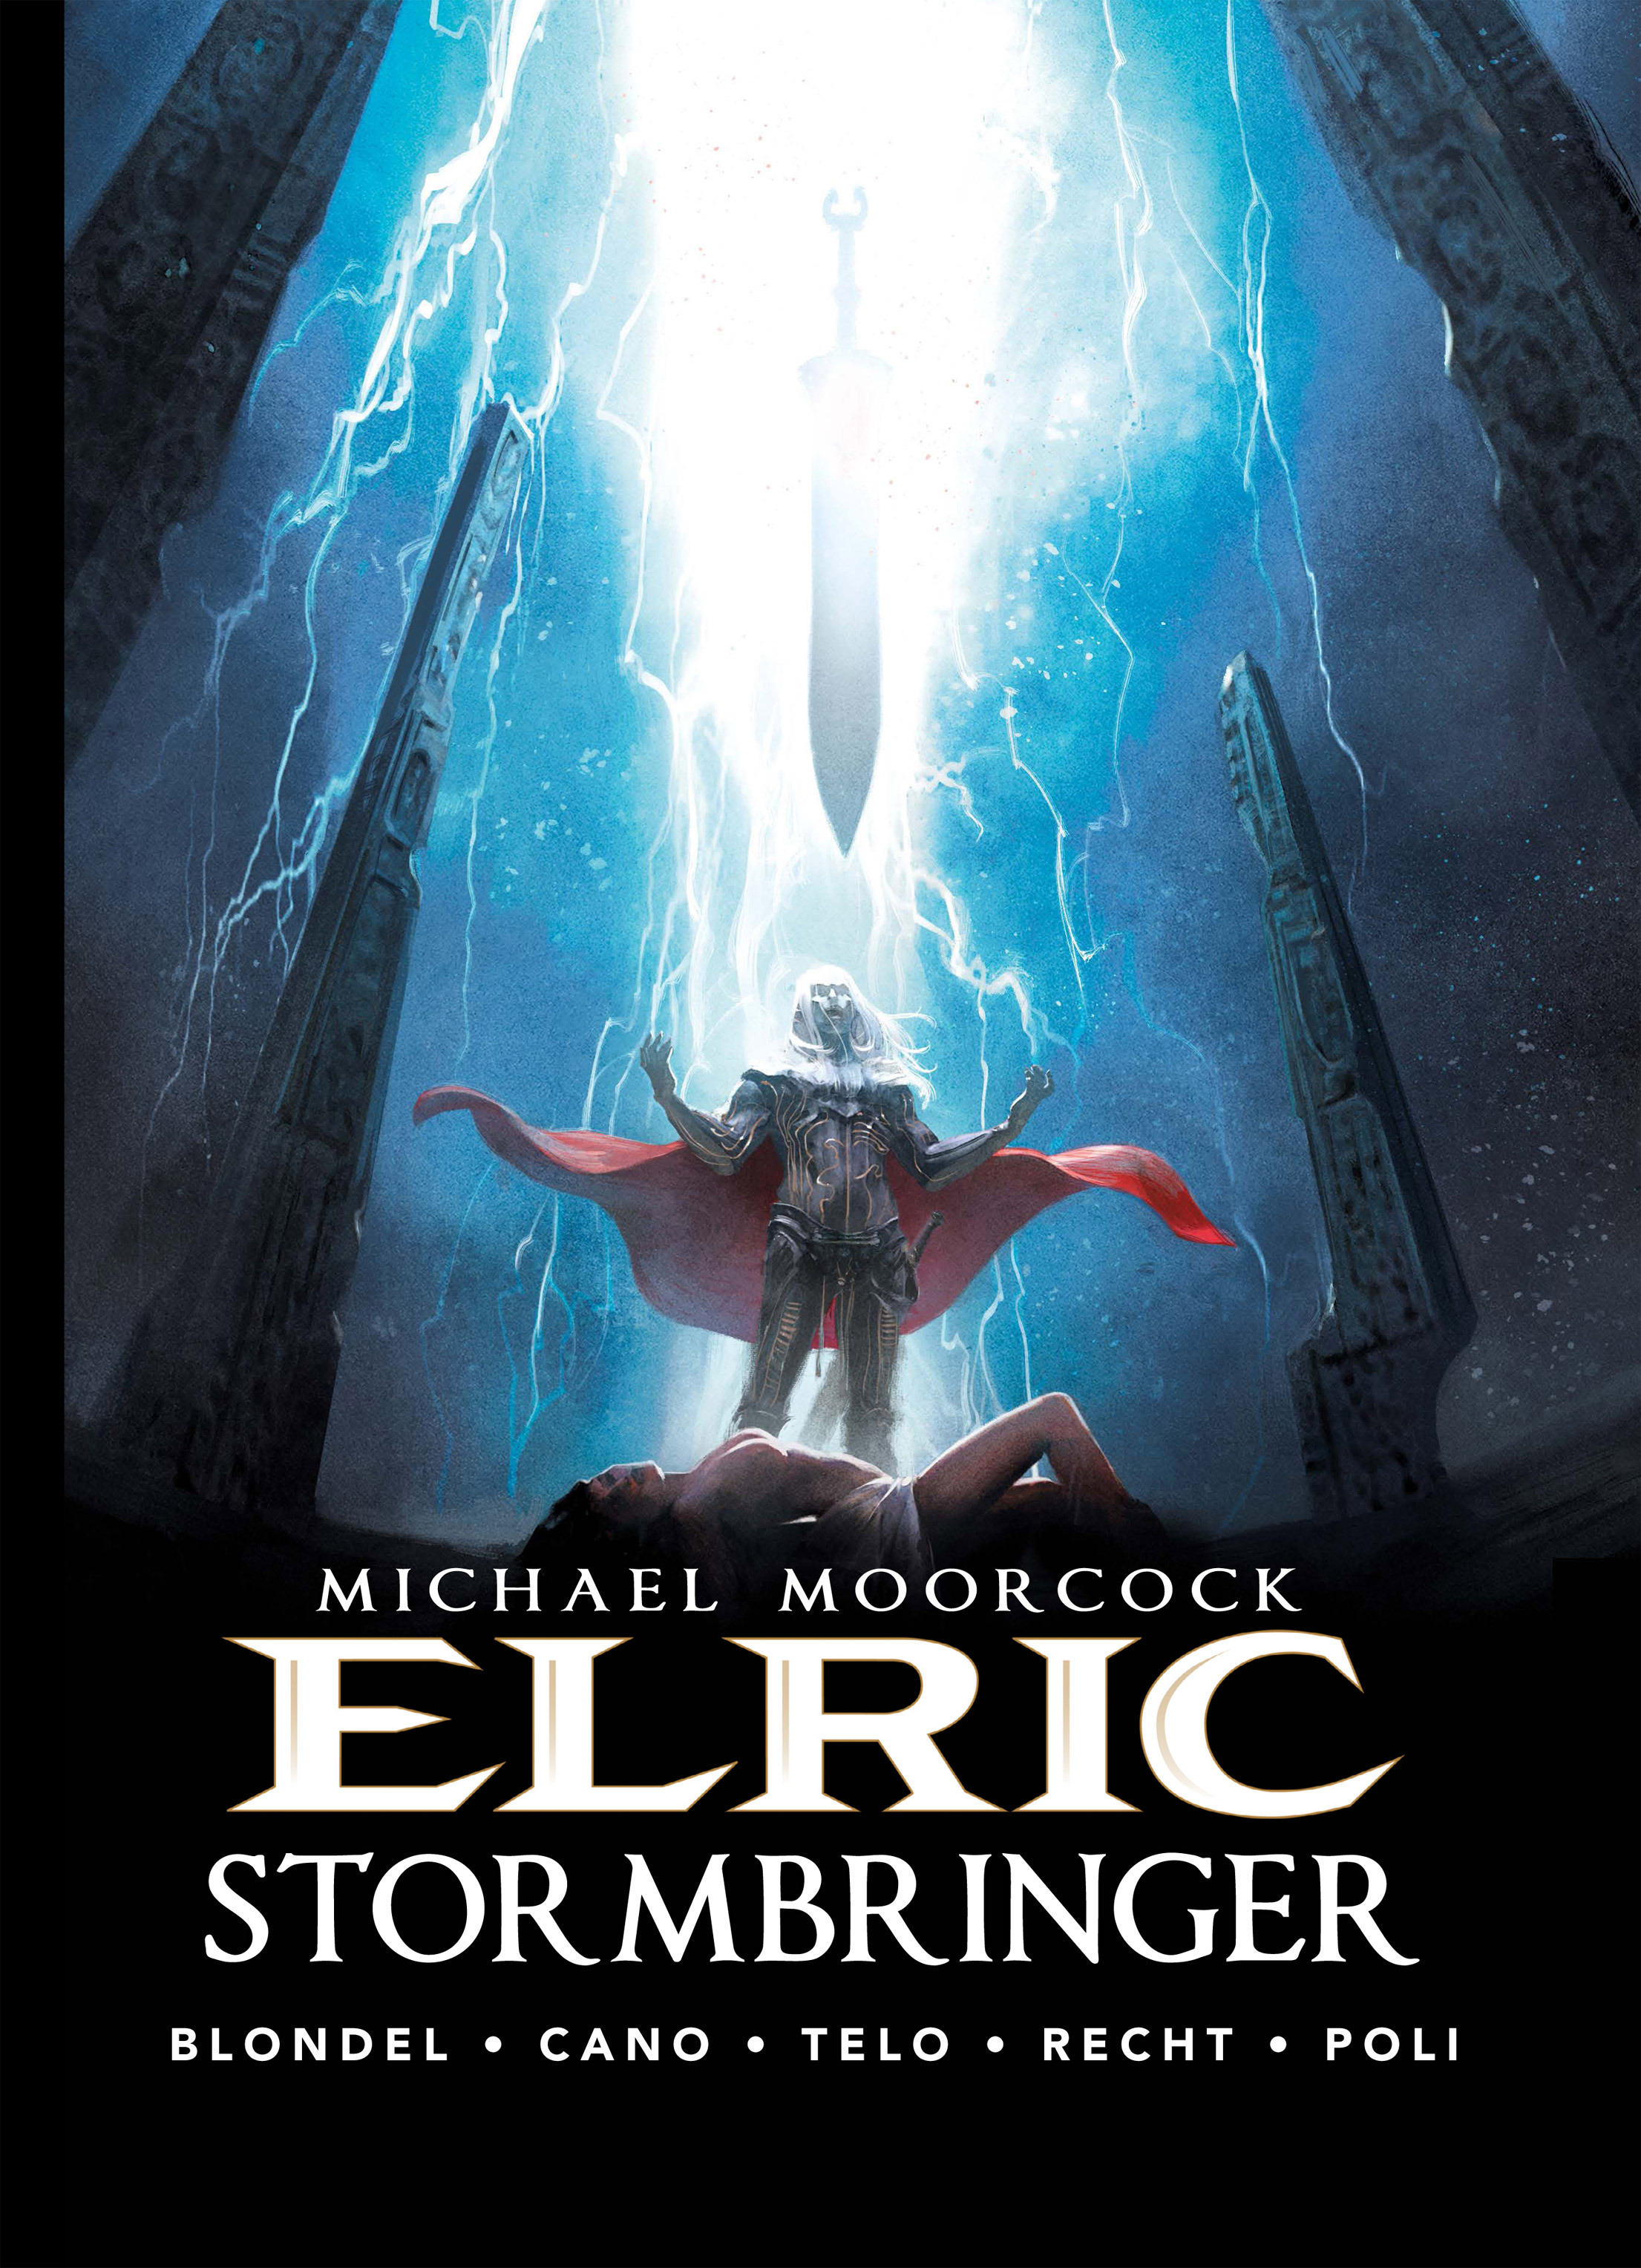 Read online Elric comic -  Issue # TPB 2 - 1